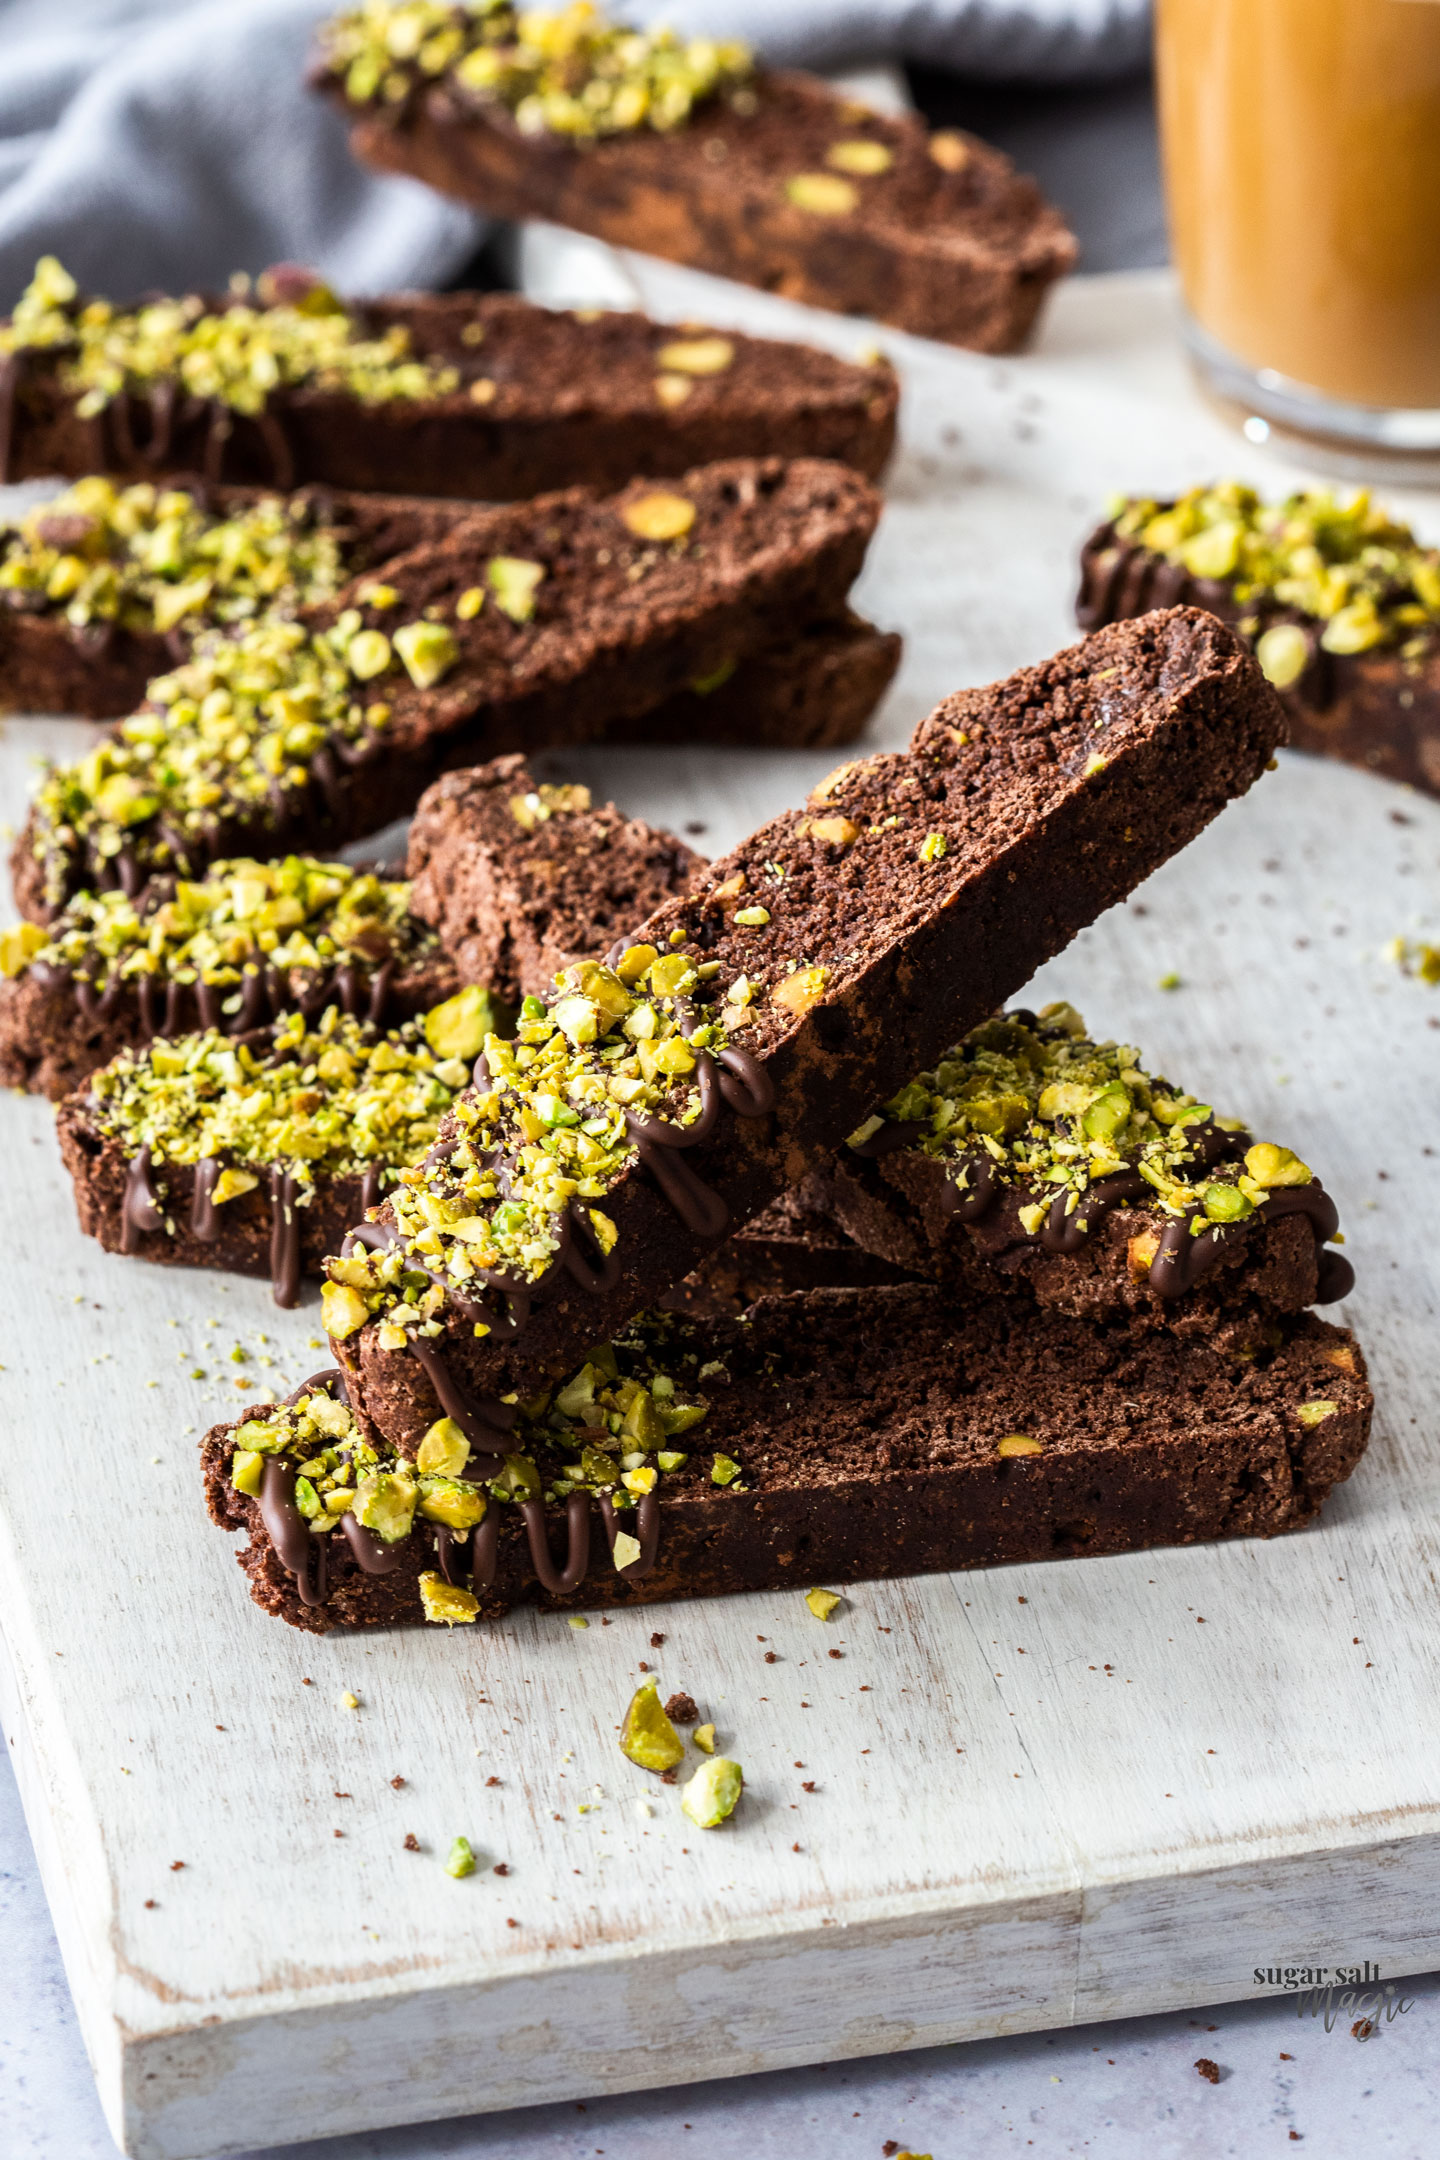 A pile of chocolate biscotti with pieces of pistachio.